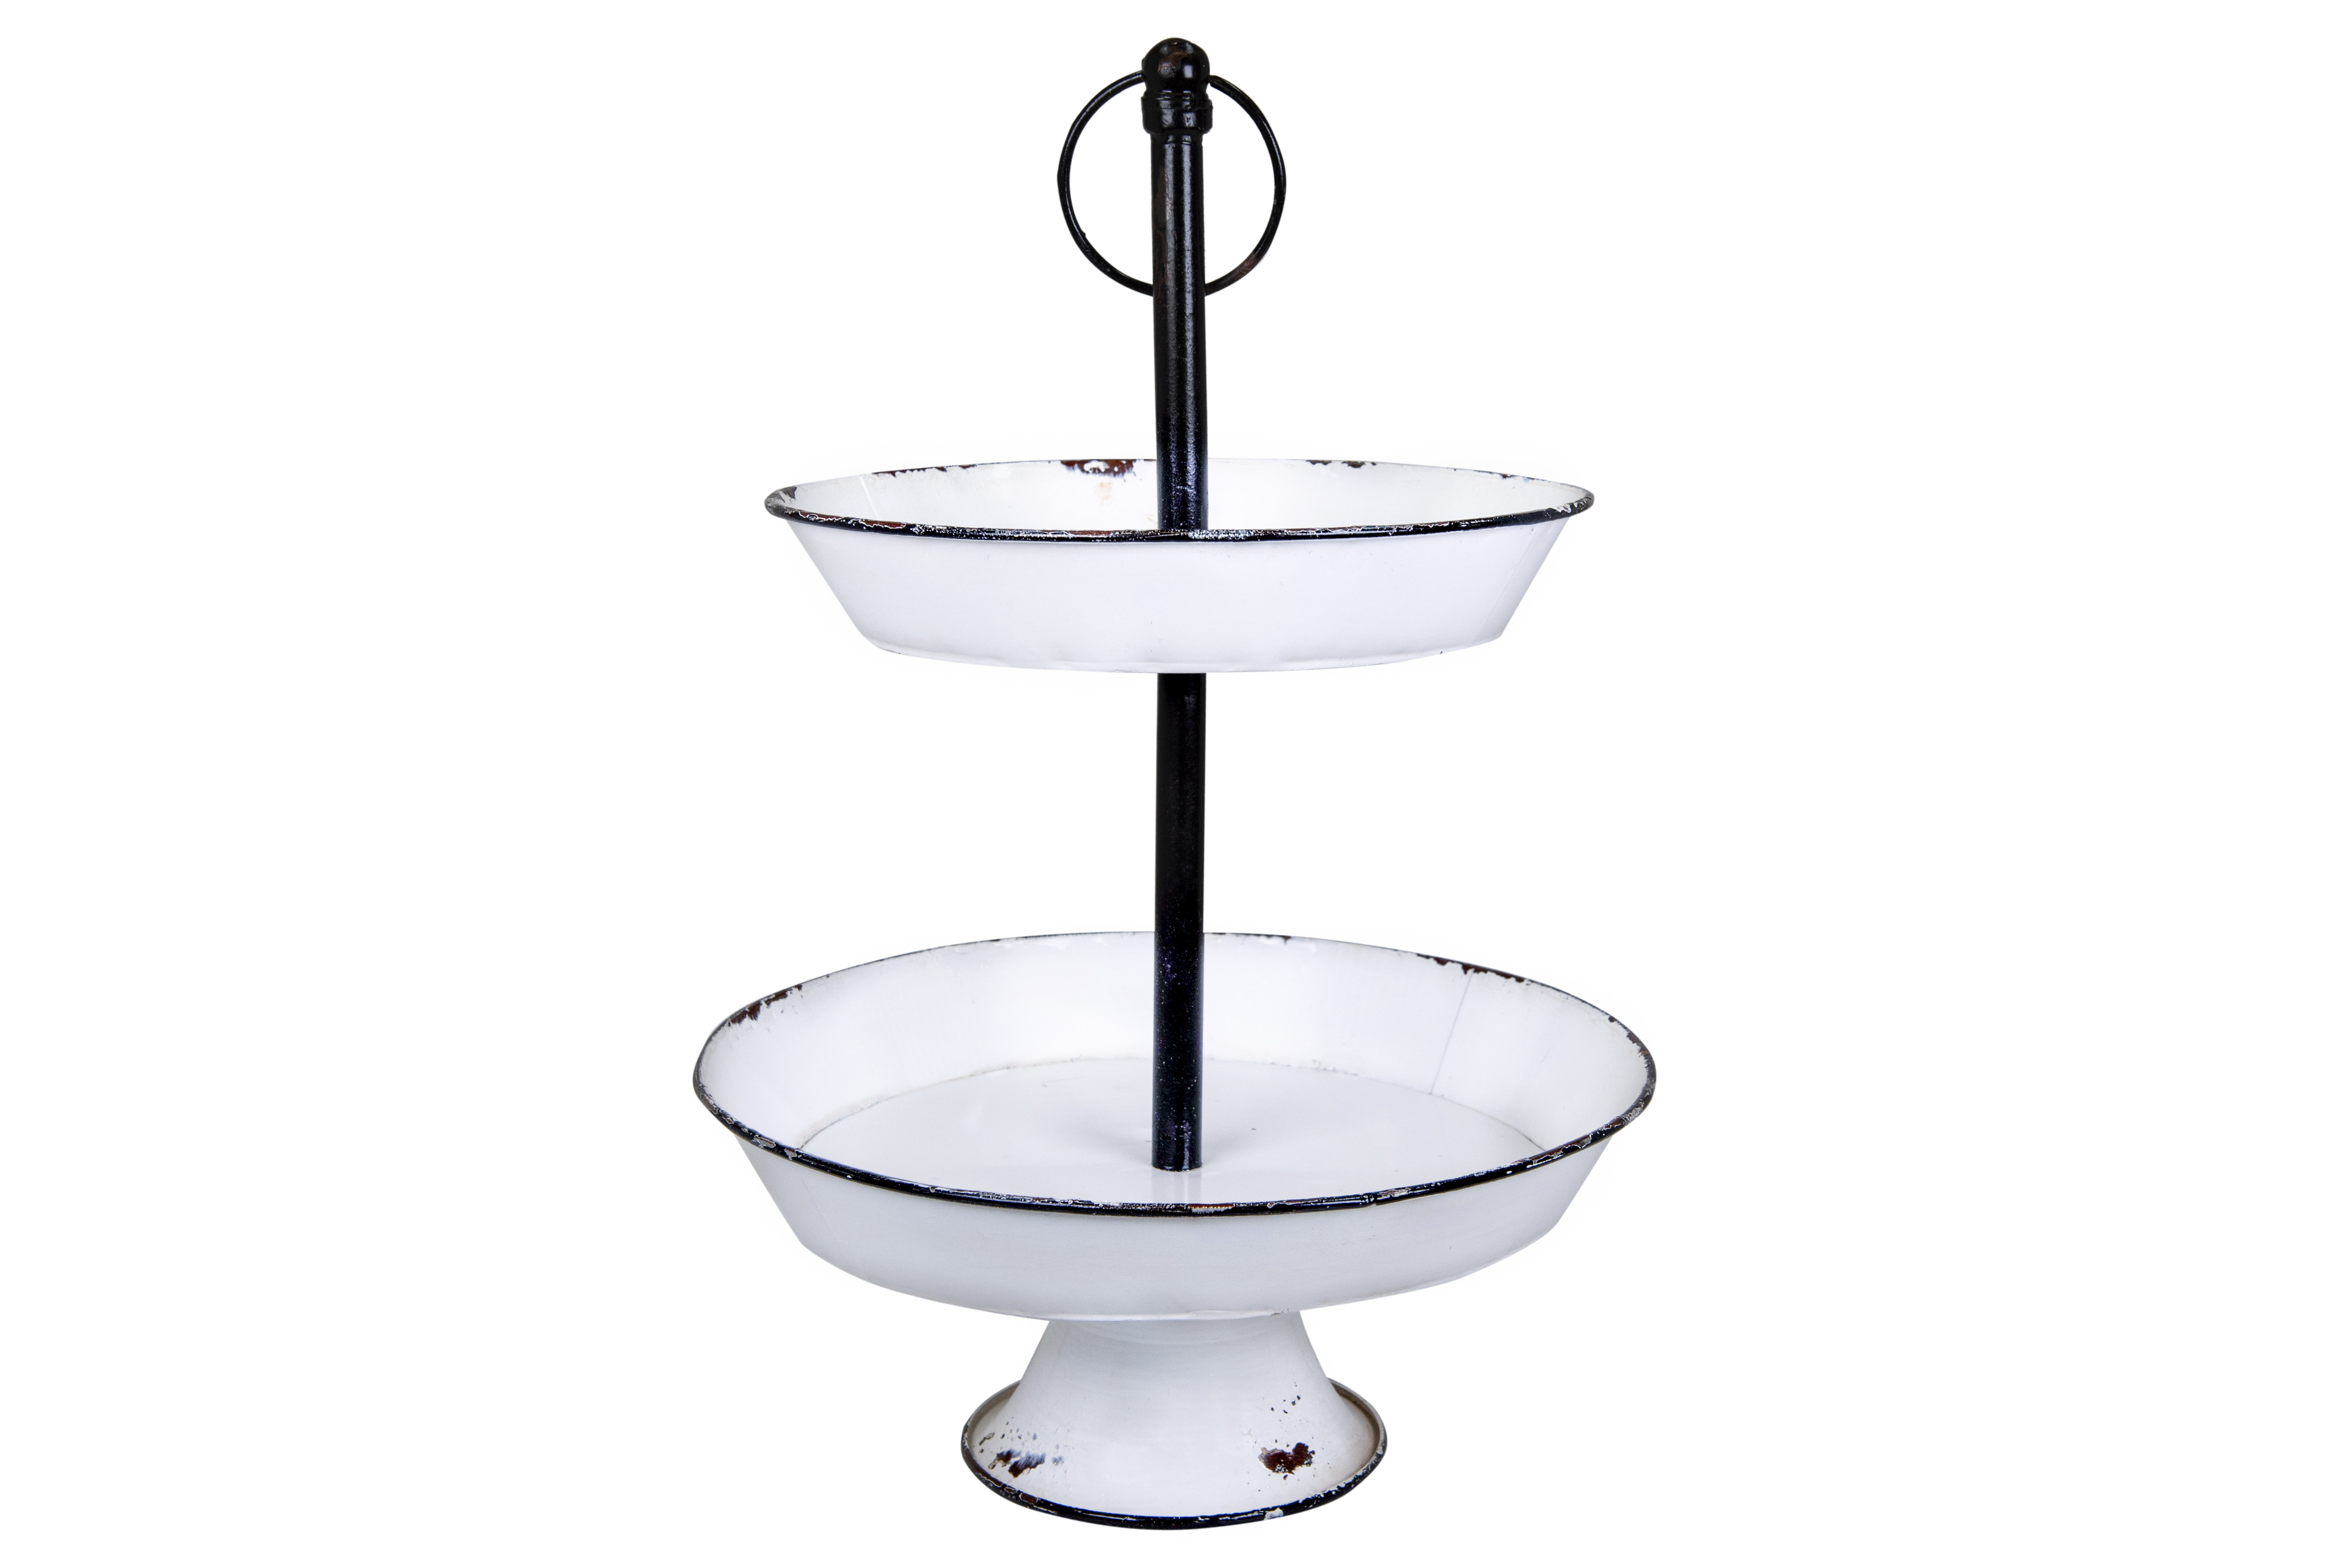 Decorative 2-Tier Enameled Metal Tray with Distressed Finish & Handle - Image 0